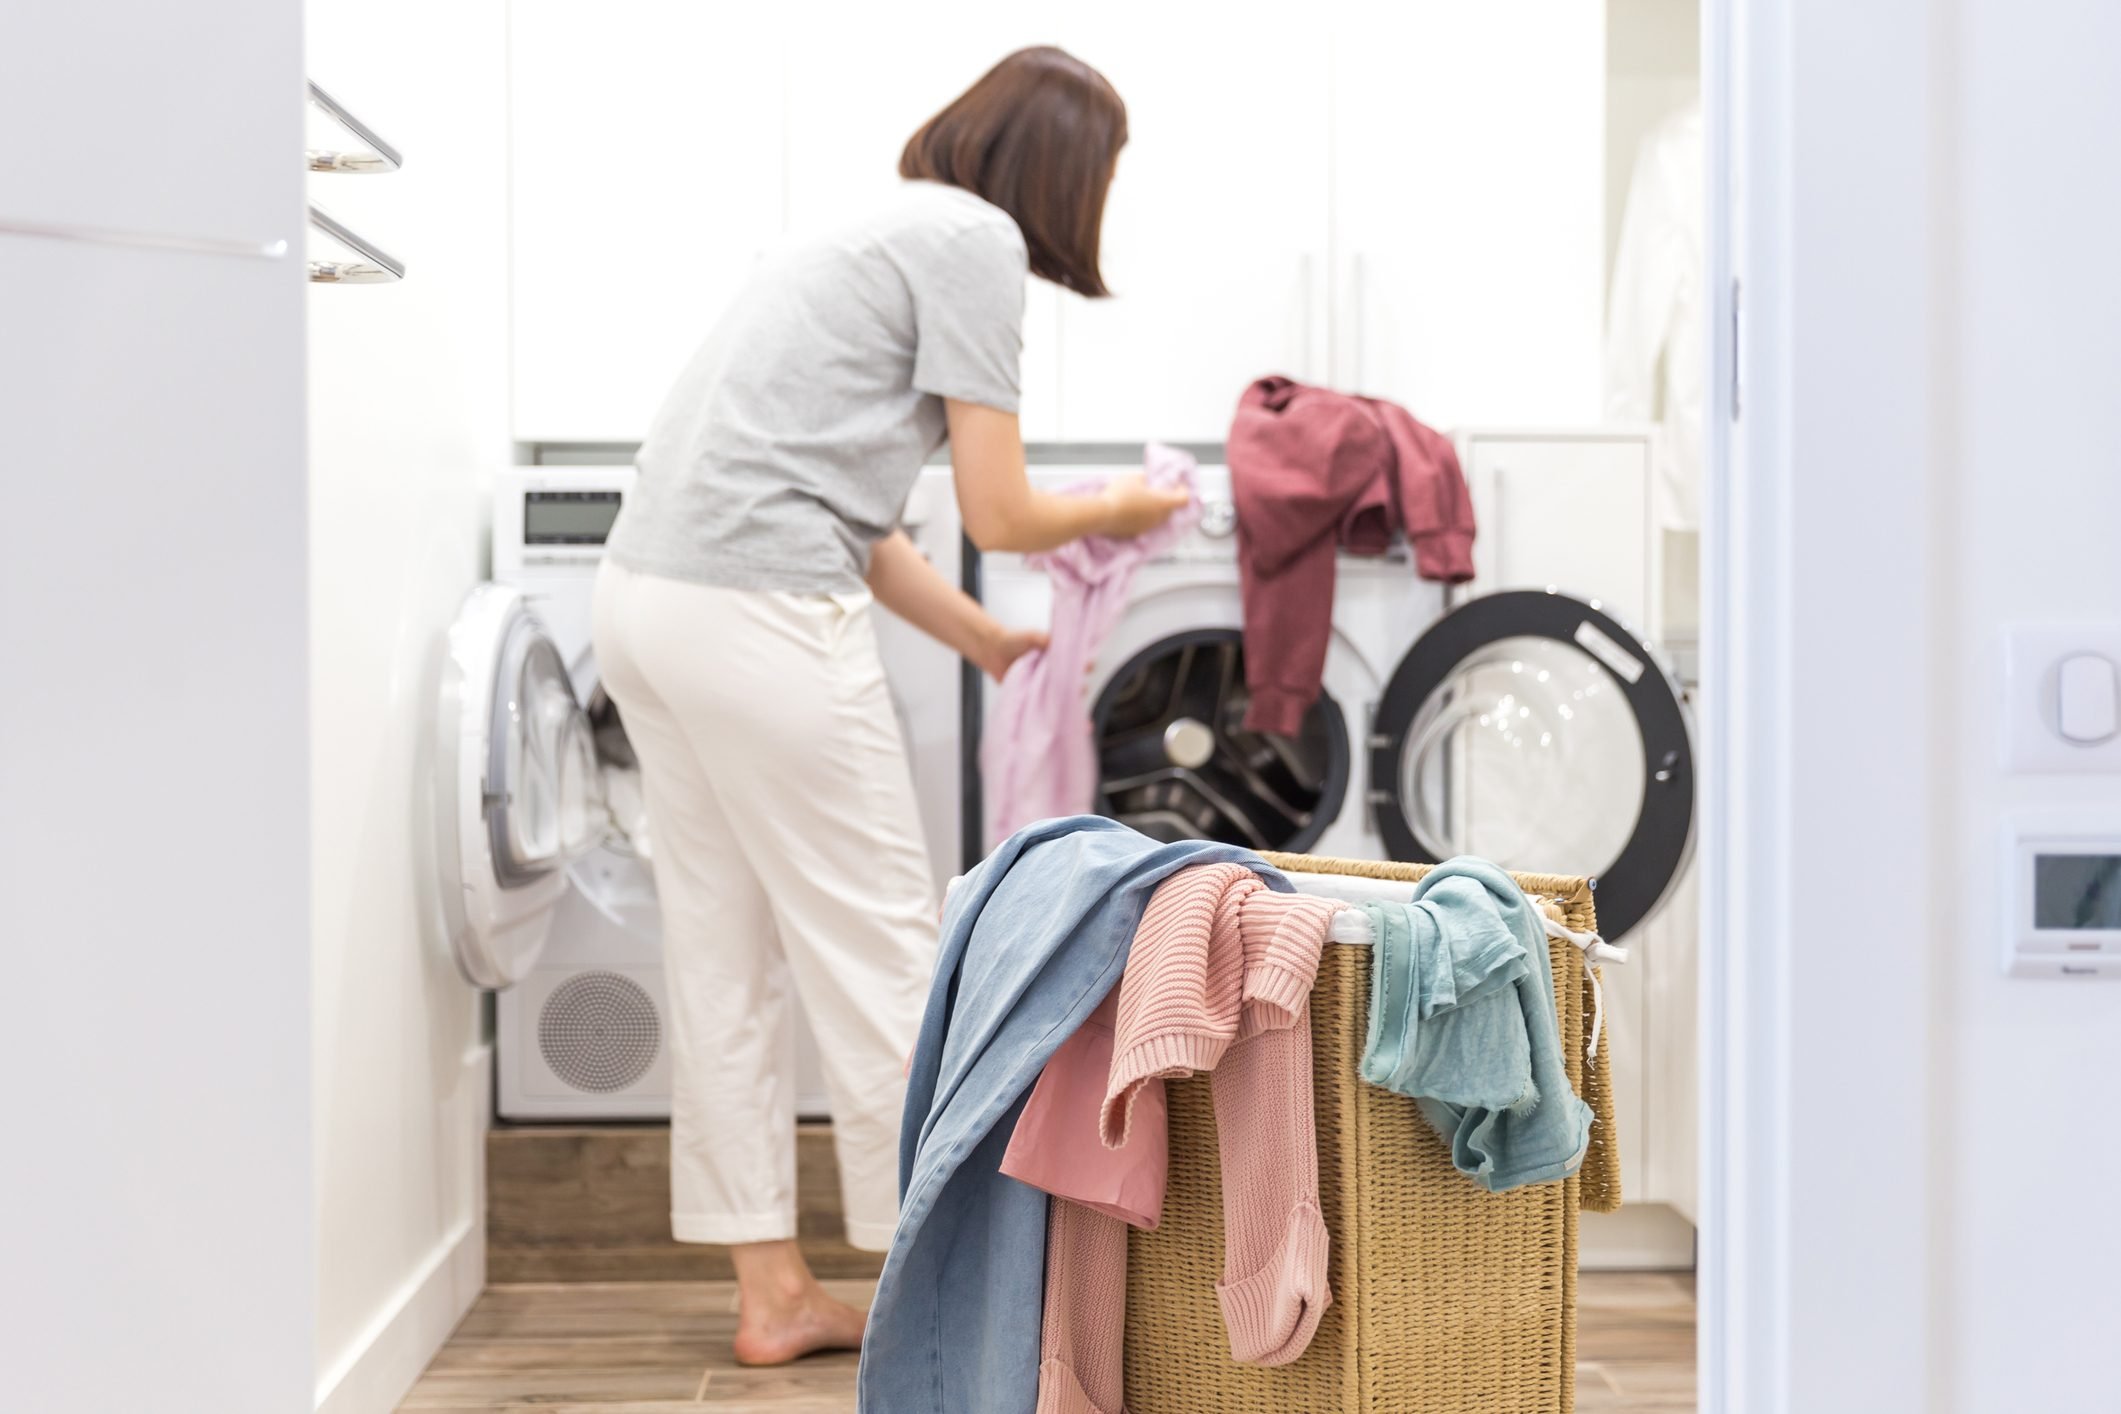 women separating clothes in the dryer clinging together with static electricity